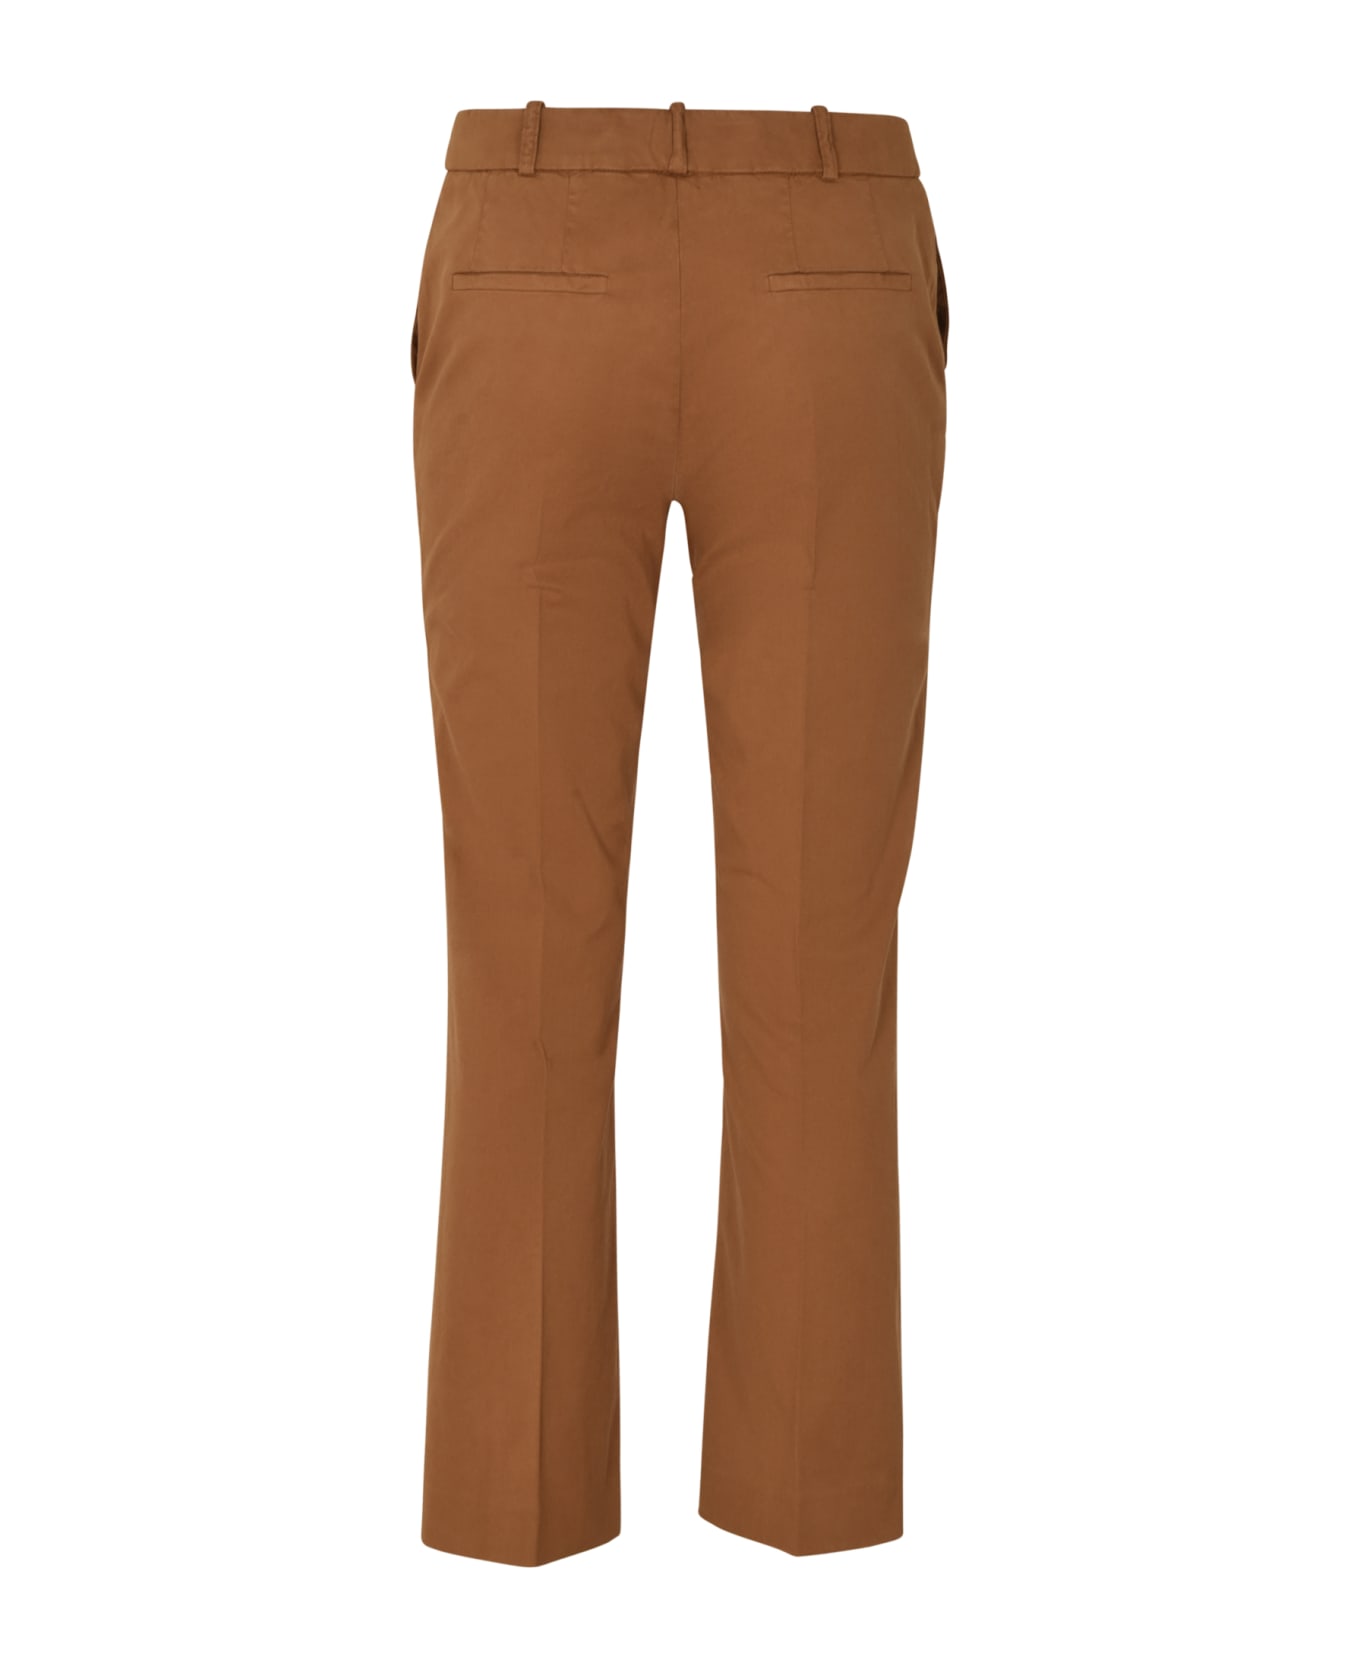 Kiltie Concealed Trousers - Tabacco